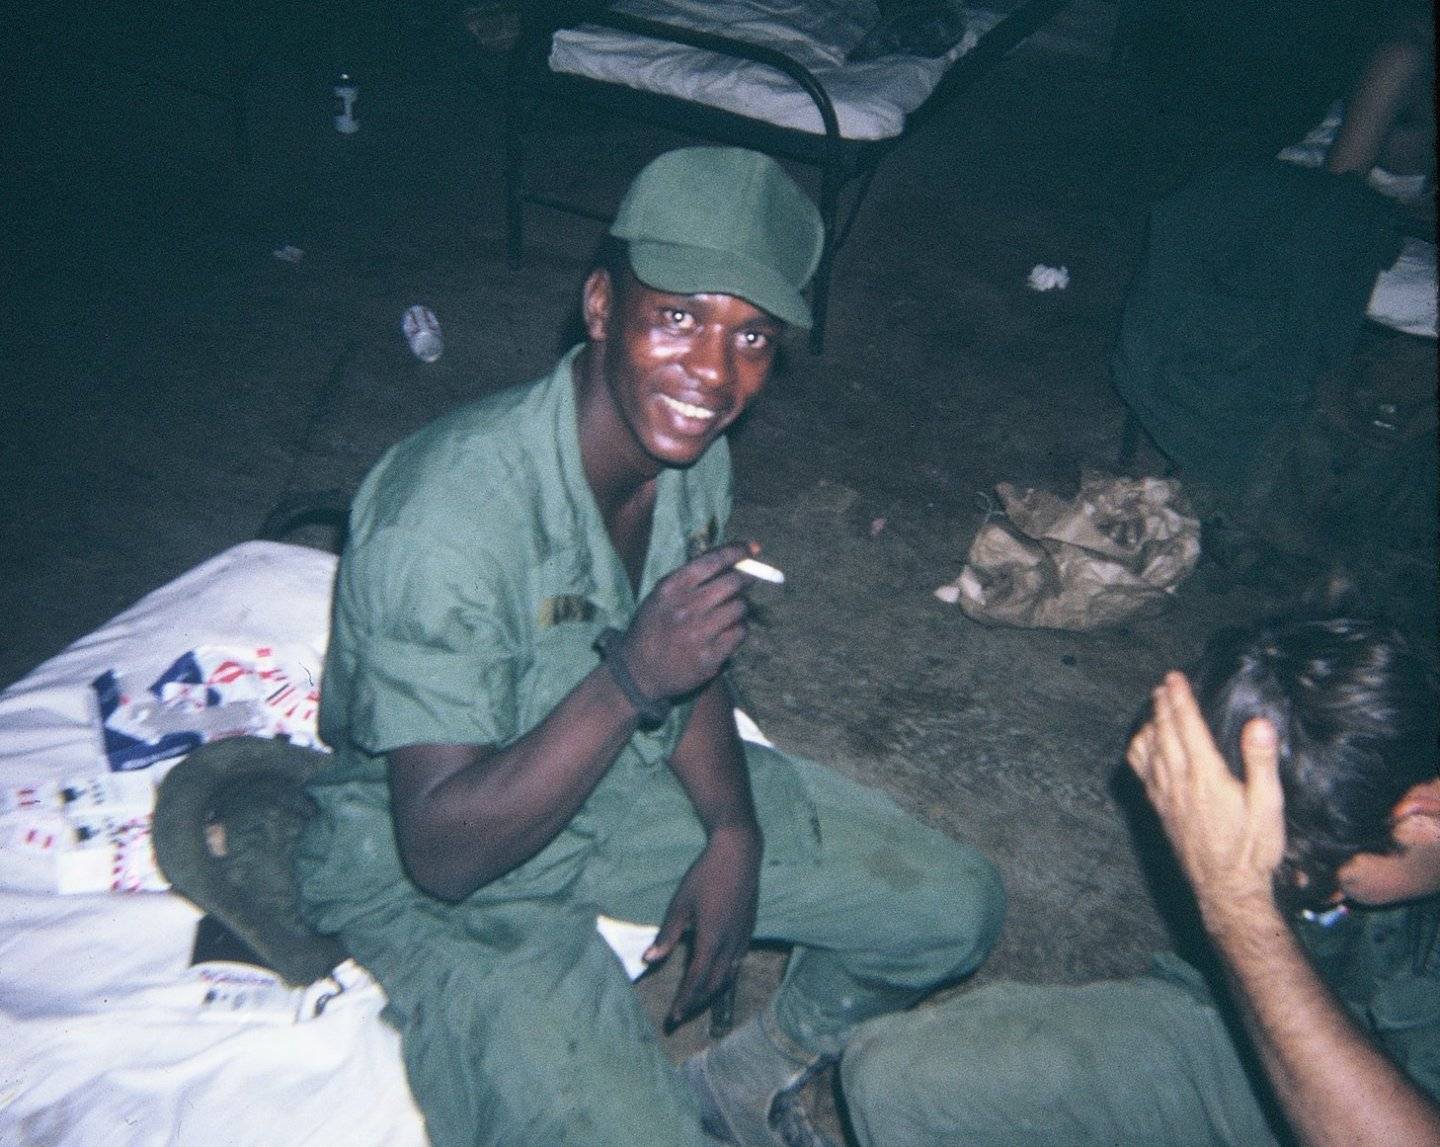 Young U.S. soldier sitting on his bunk at nighttime, smoking a cigarette.